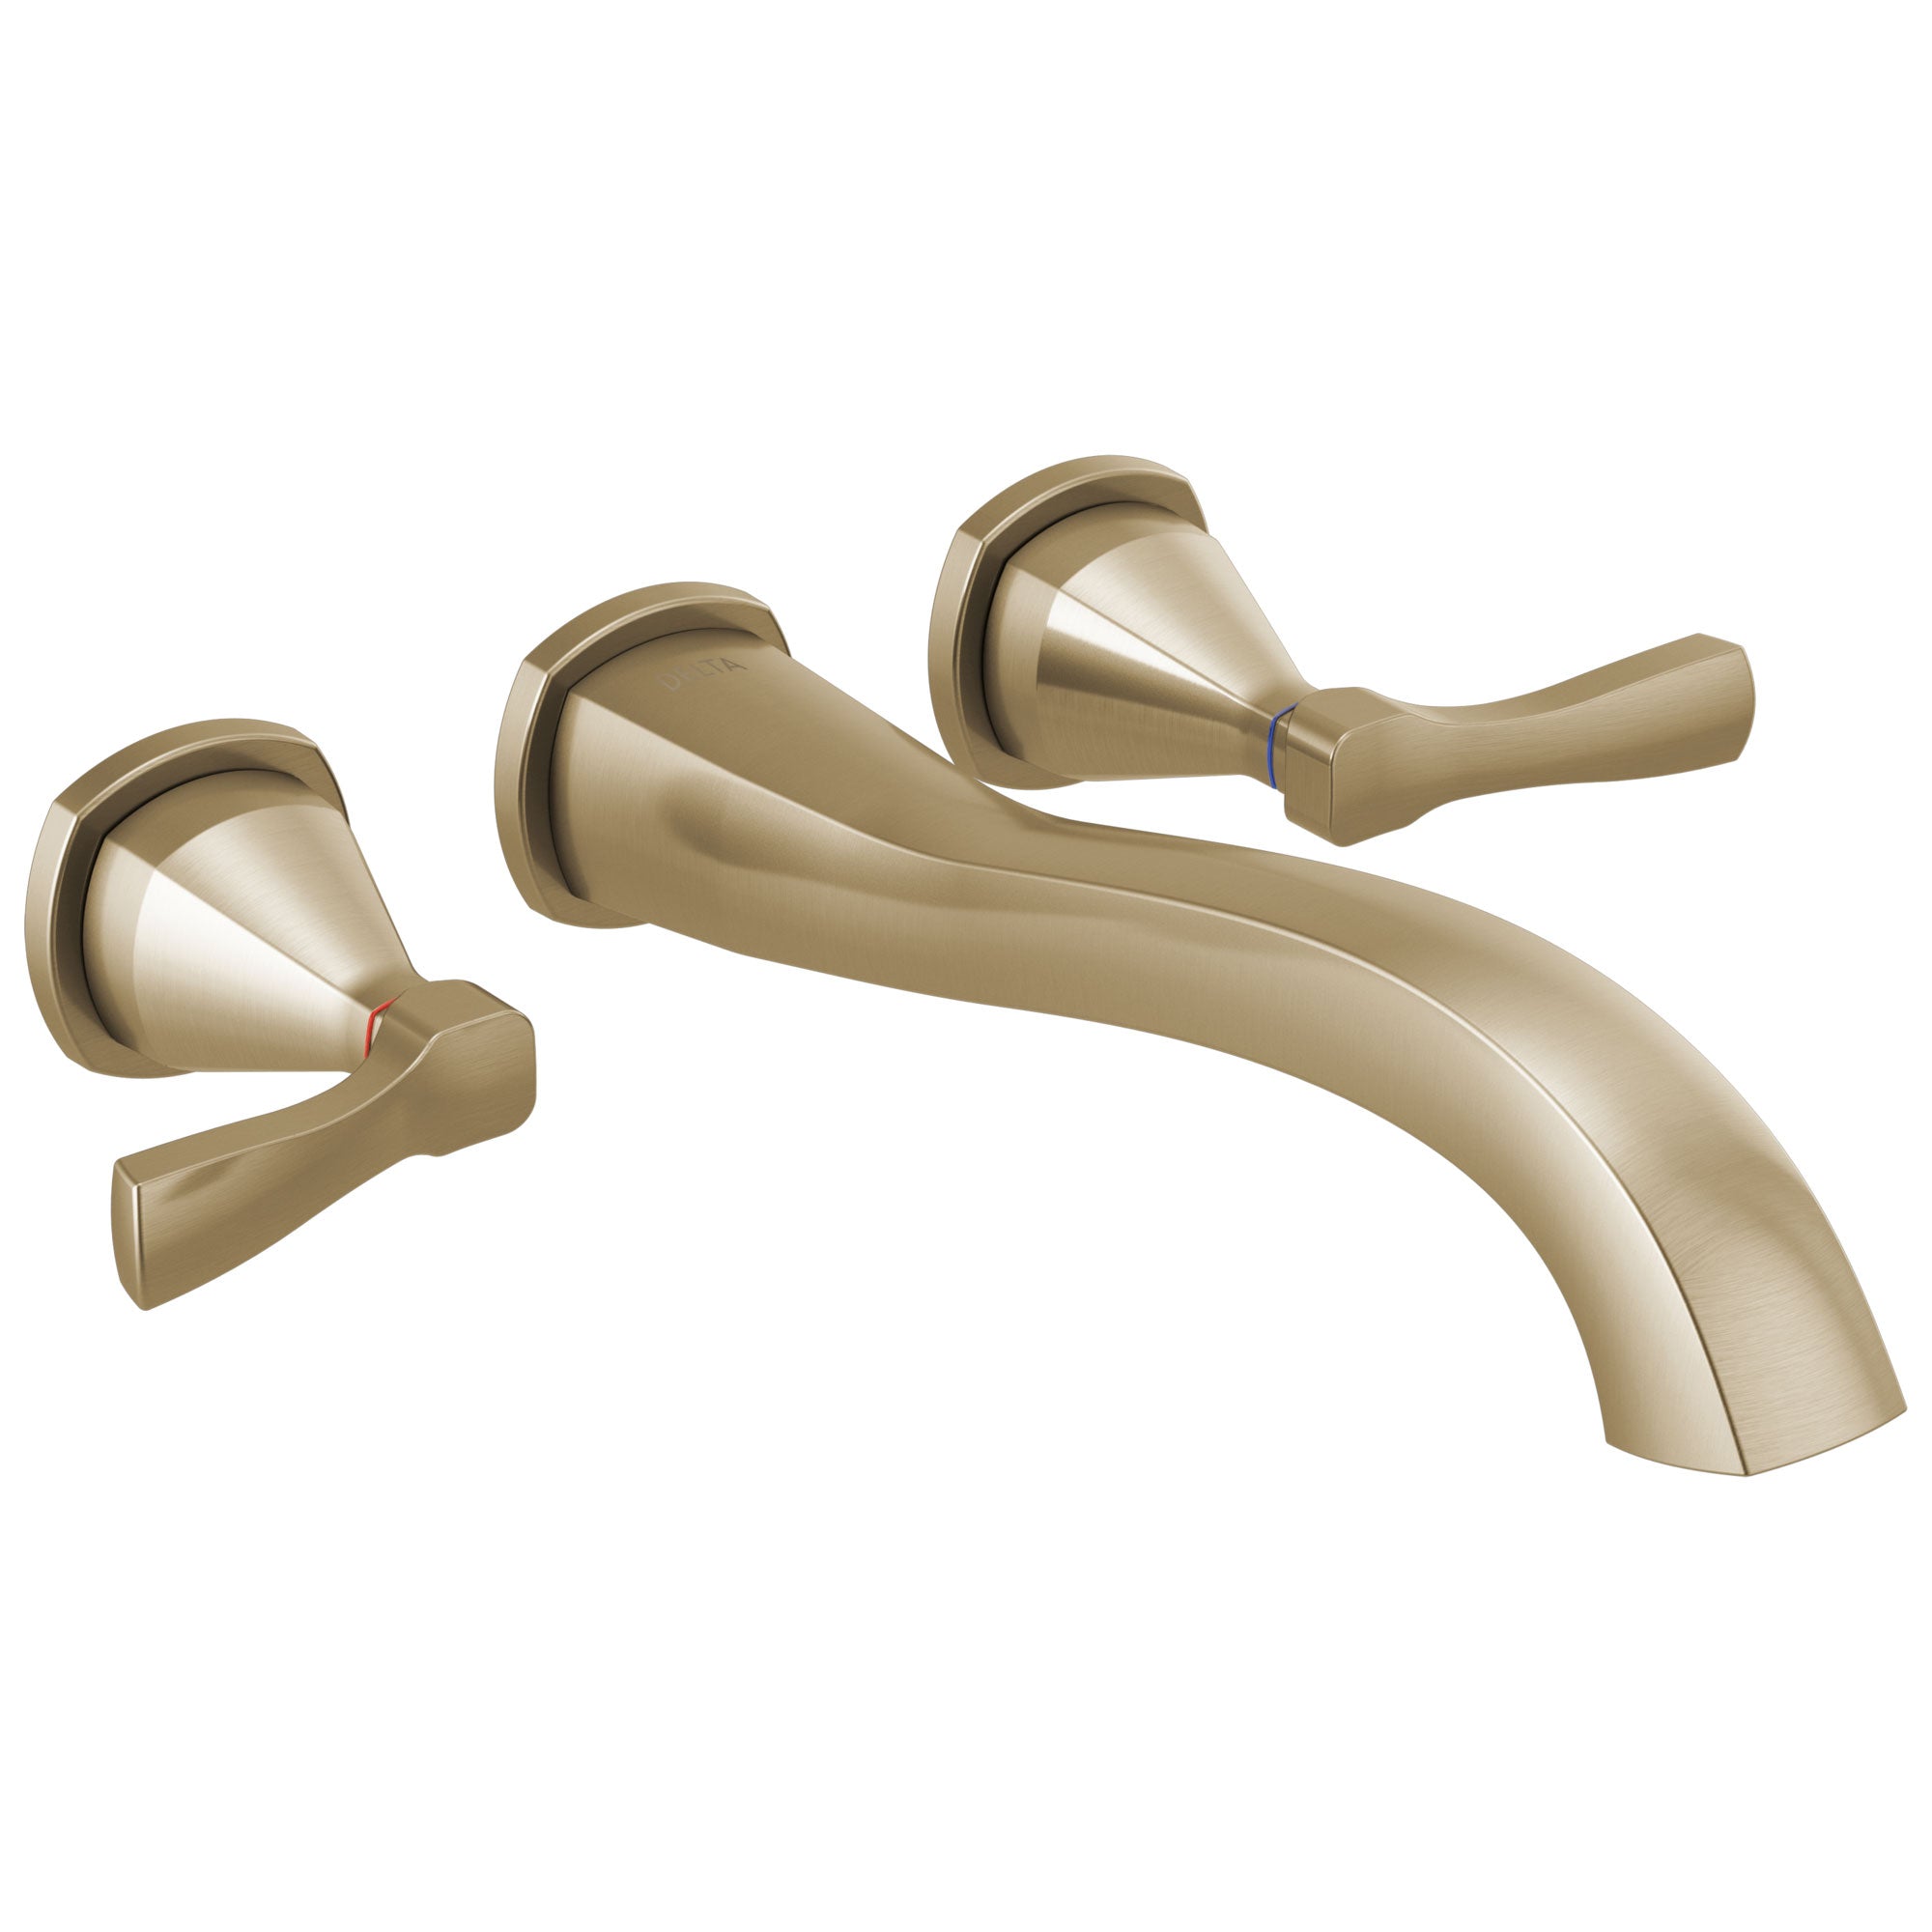 Delta Stryke Champagne Bronze Finish 2 Lever Handle Wall Mounted Tub Filler Faucet Includes Rough-in Valve D3016V